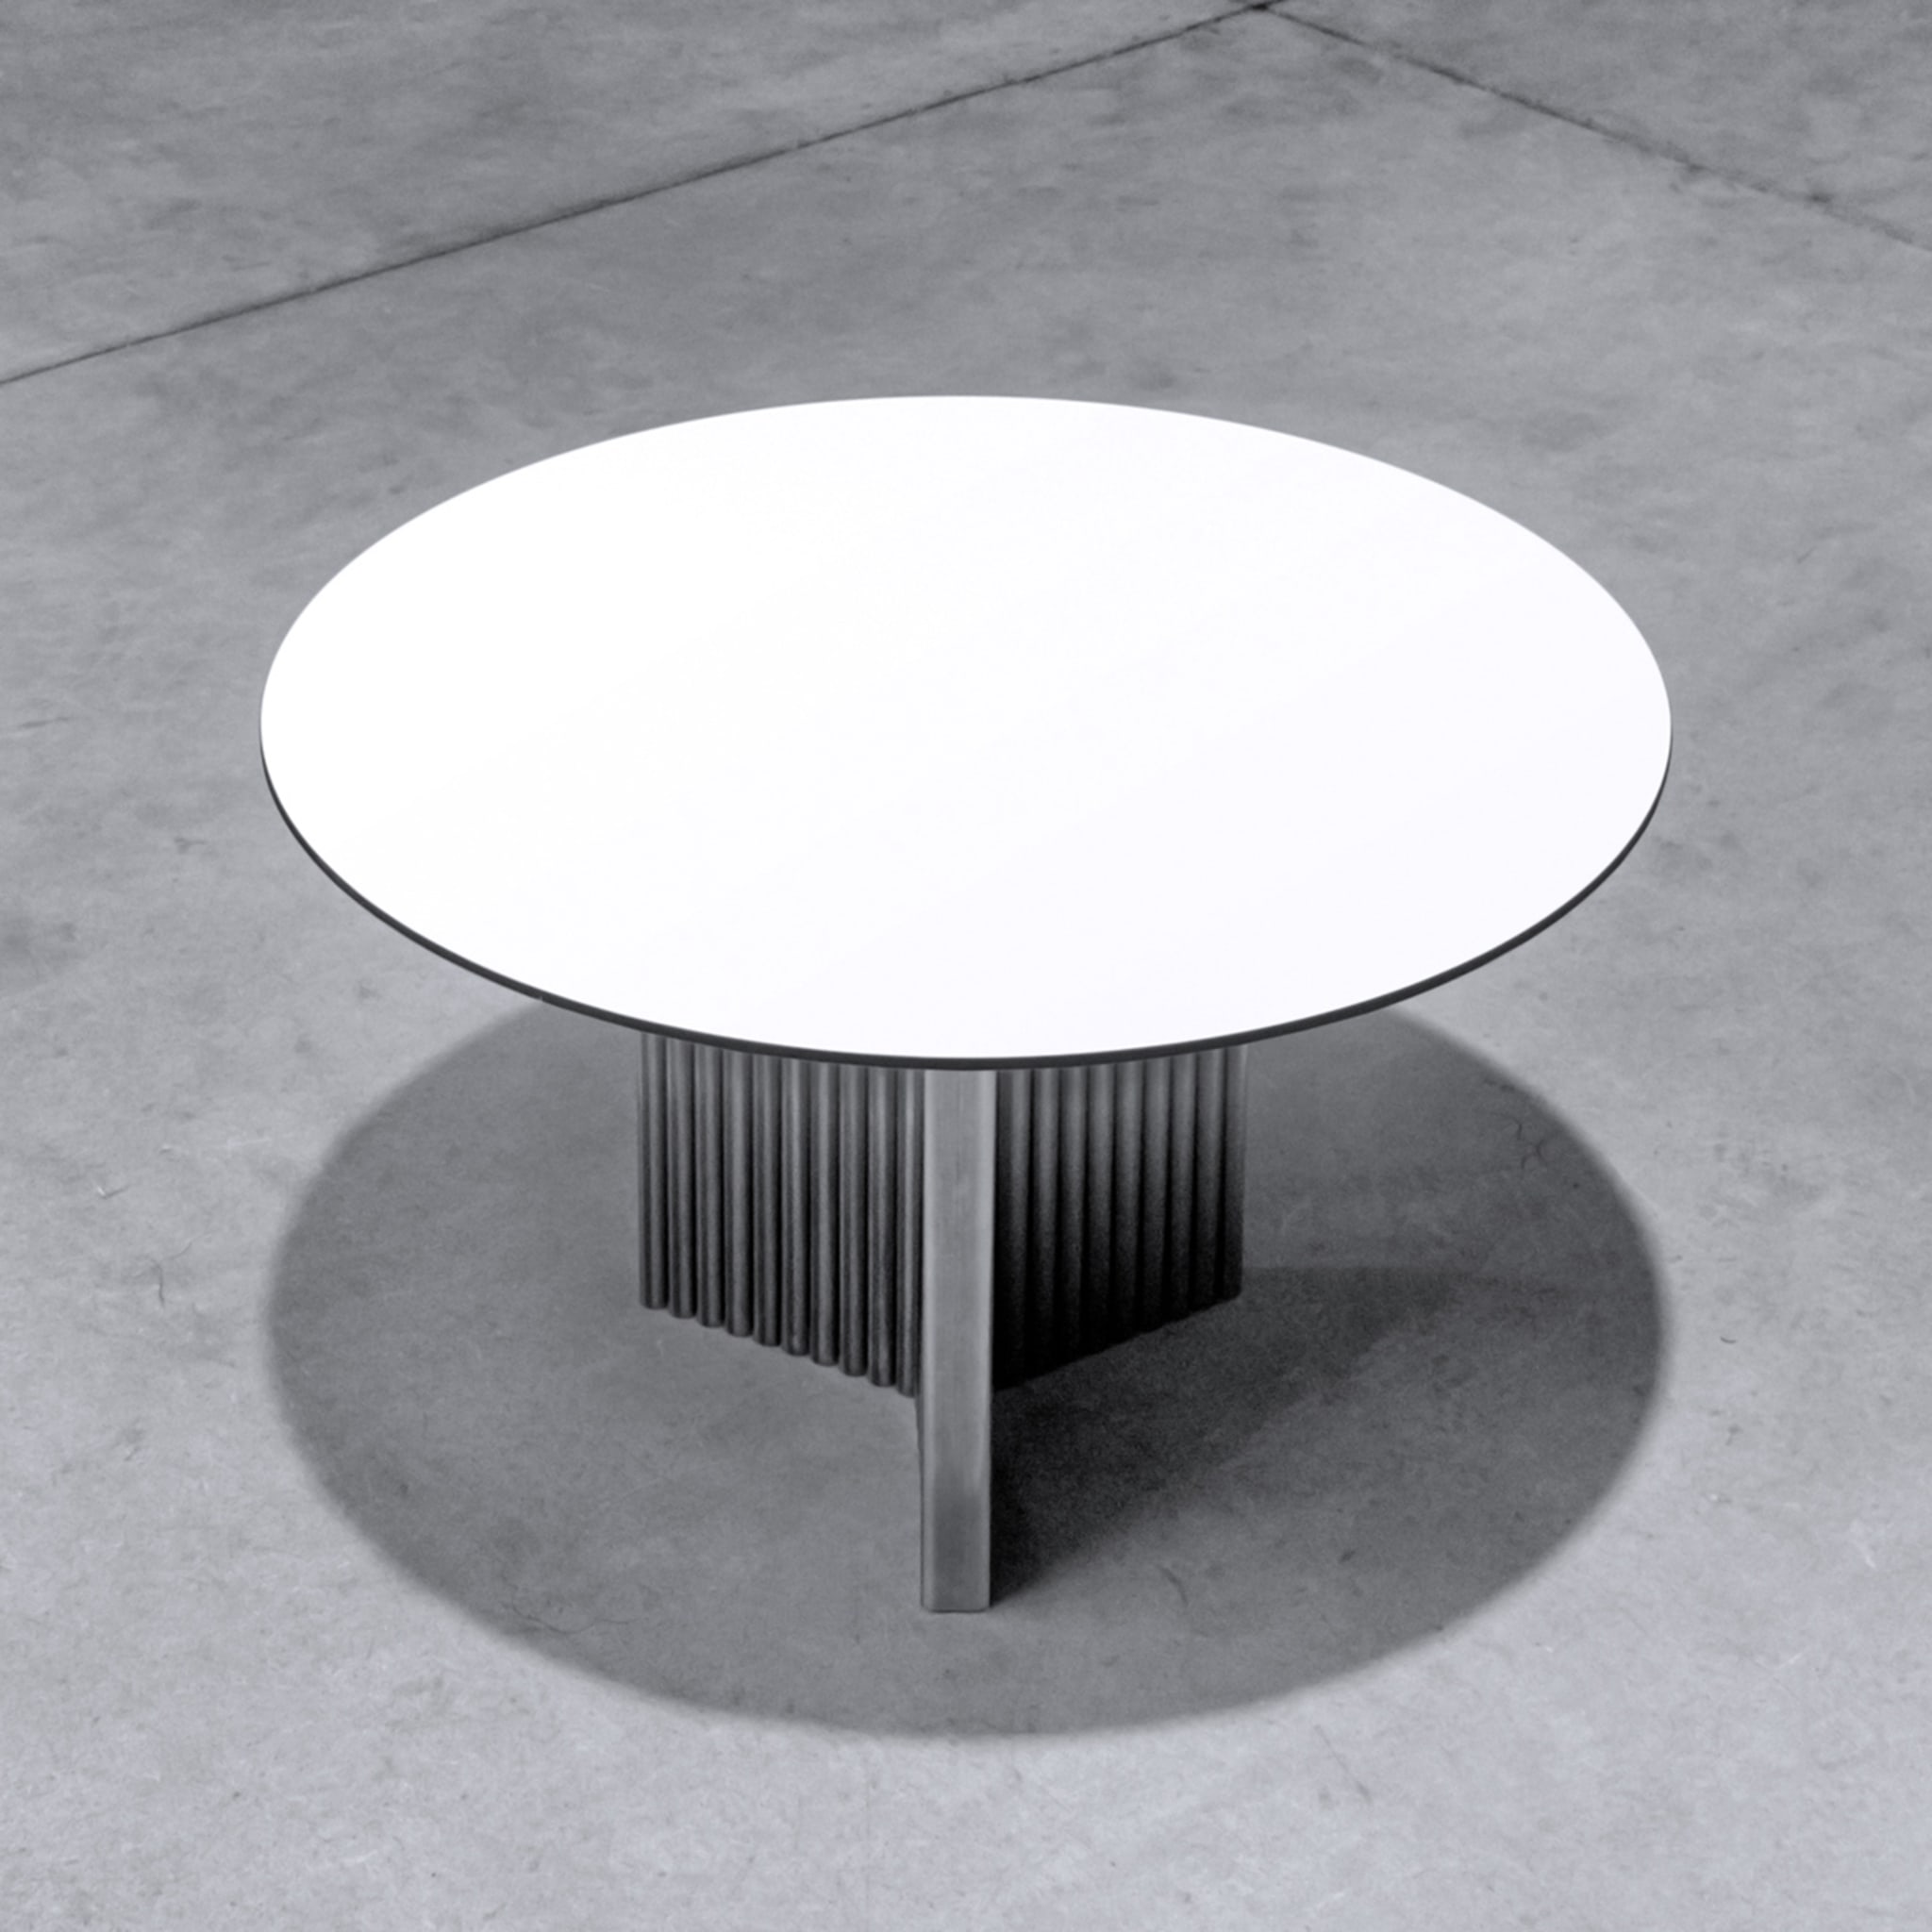 T-T03 Table - Alternative view 1